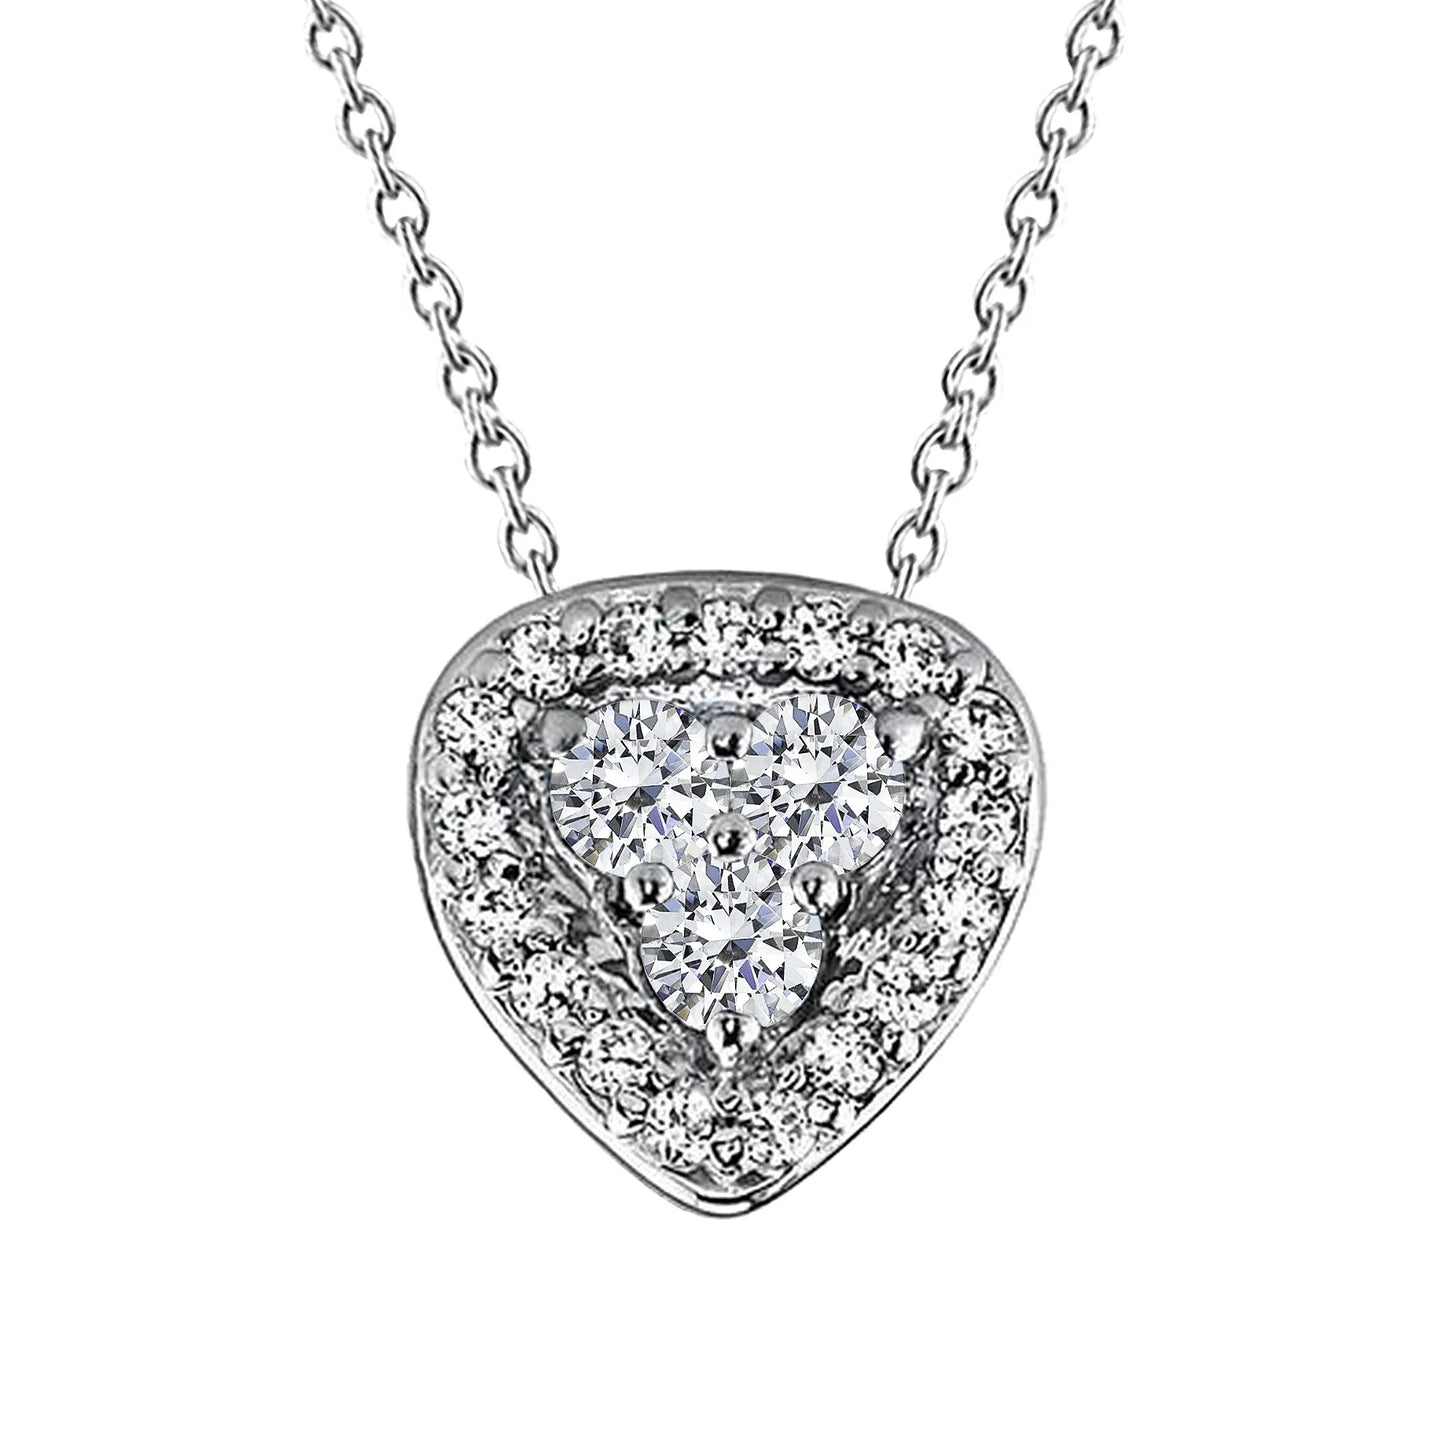 4.70 Carats Sparkling Real Diamonds Pendant Necklace With Chain Gold 14K